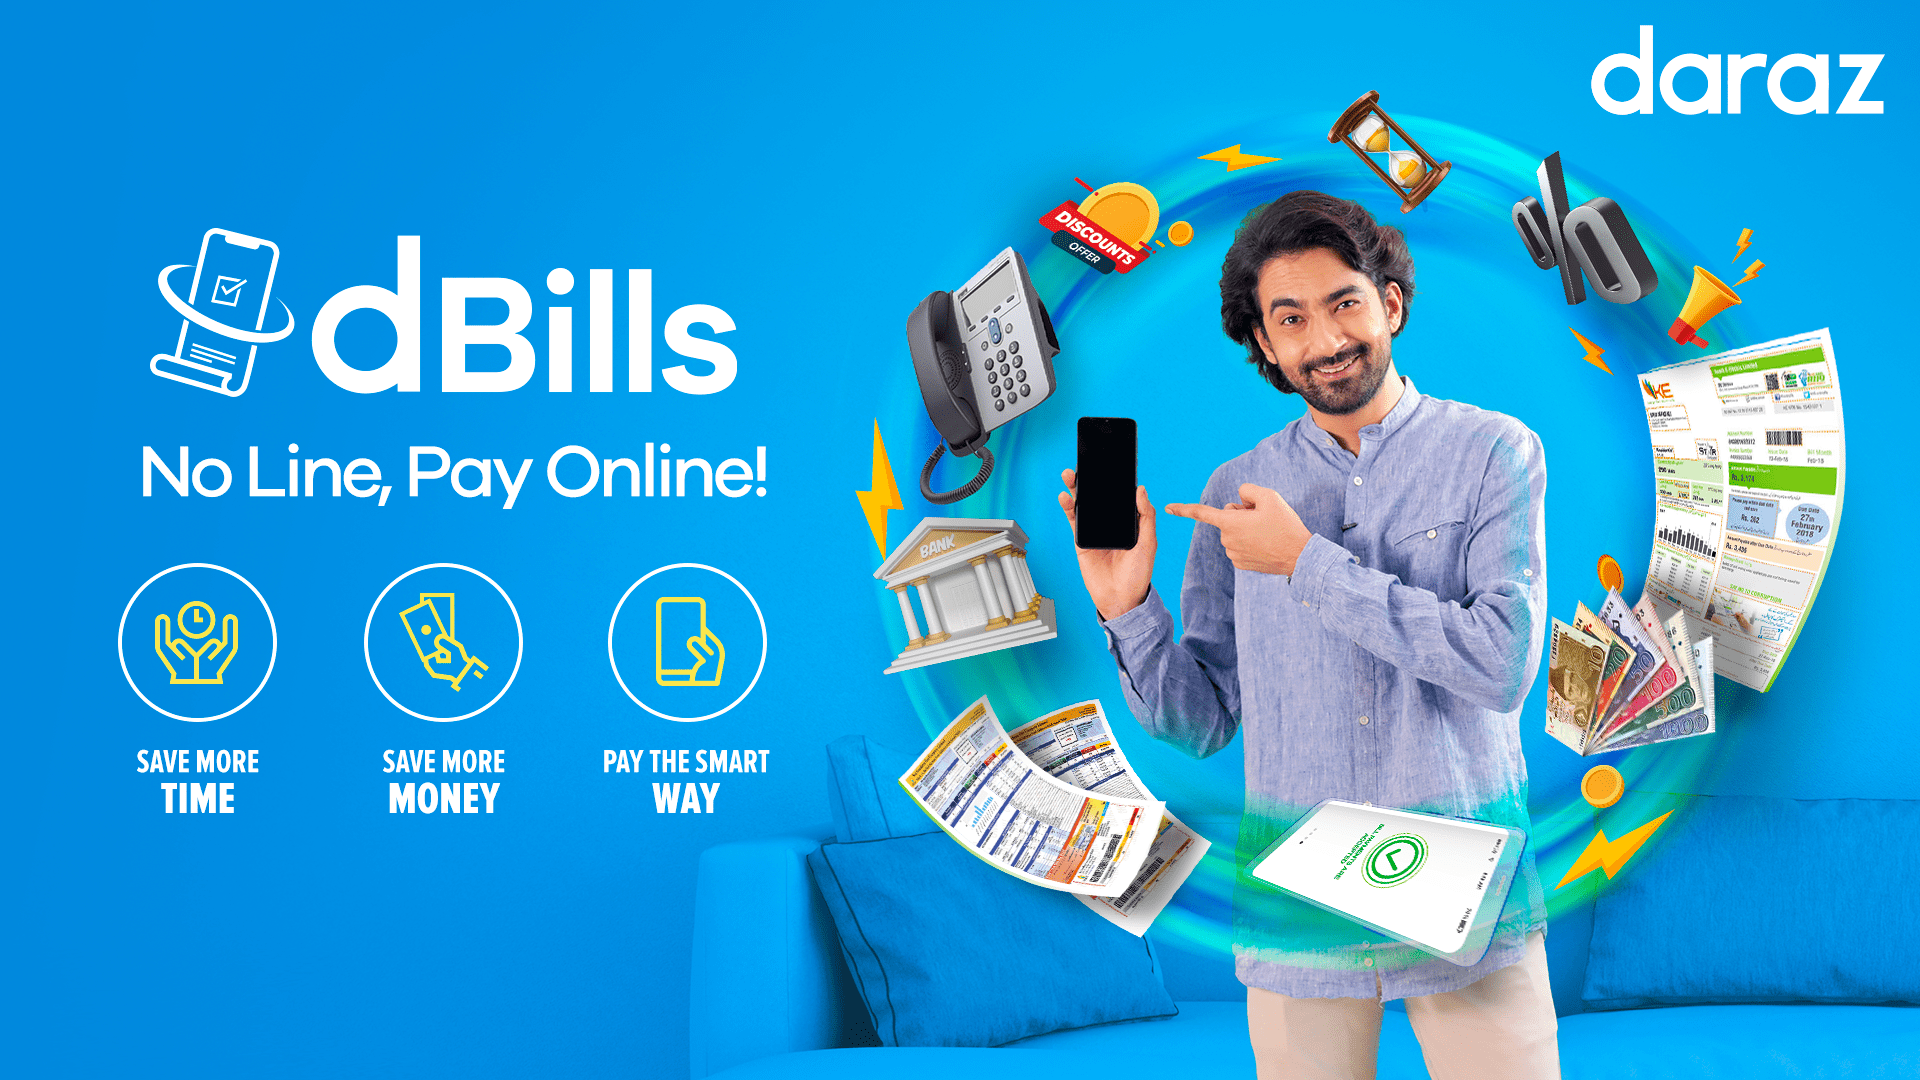 With the launch of dBills, Daraz makes utility payments easier than ever before